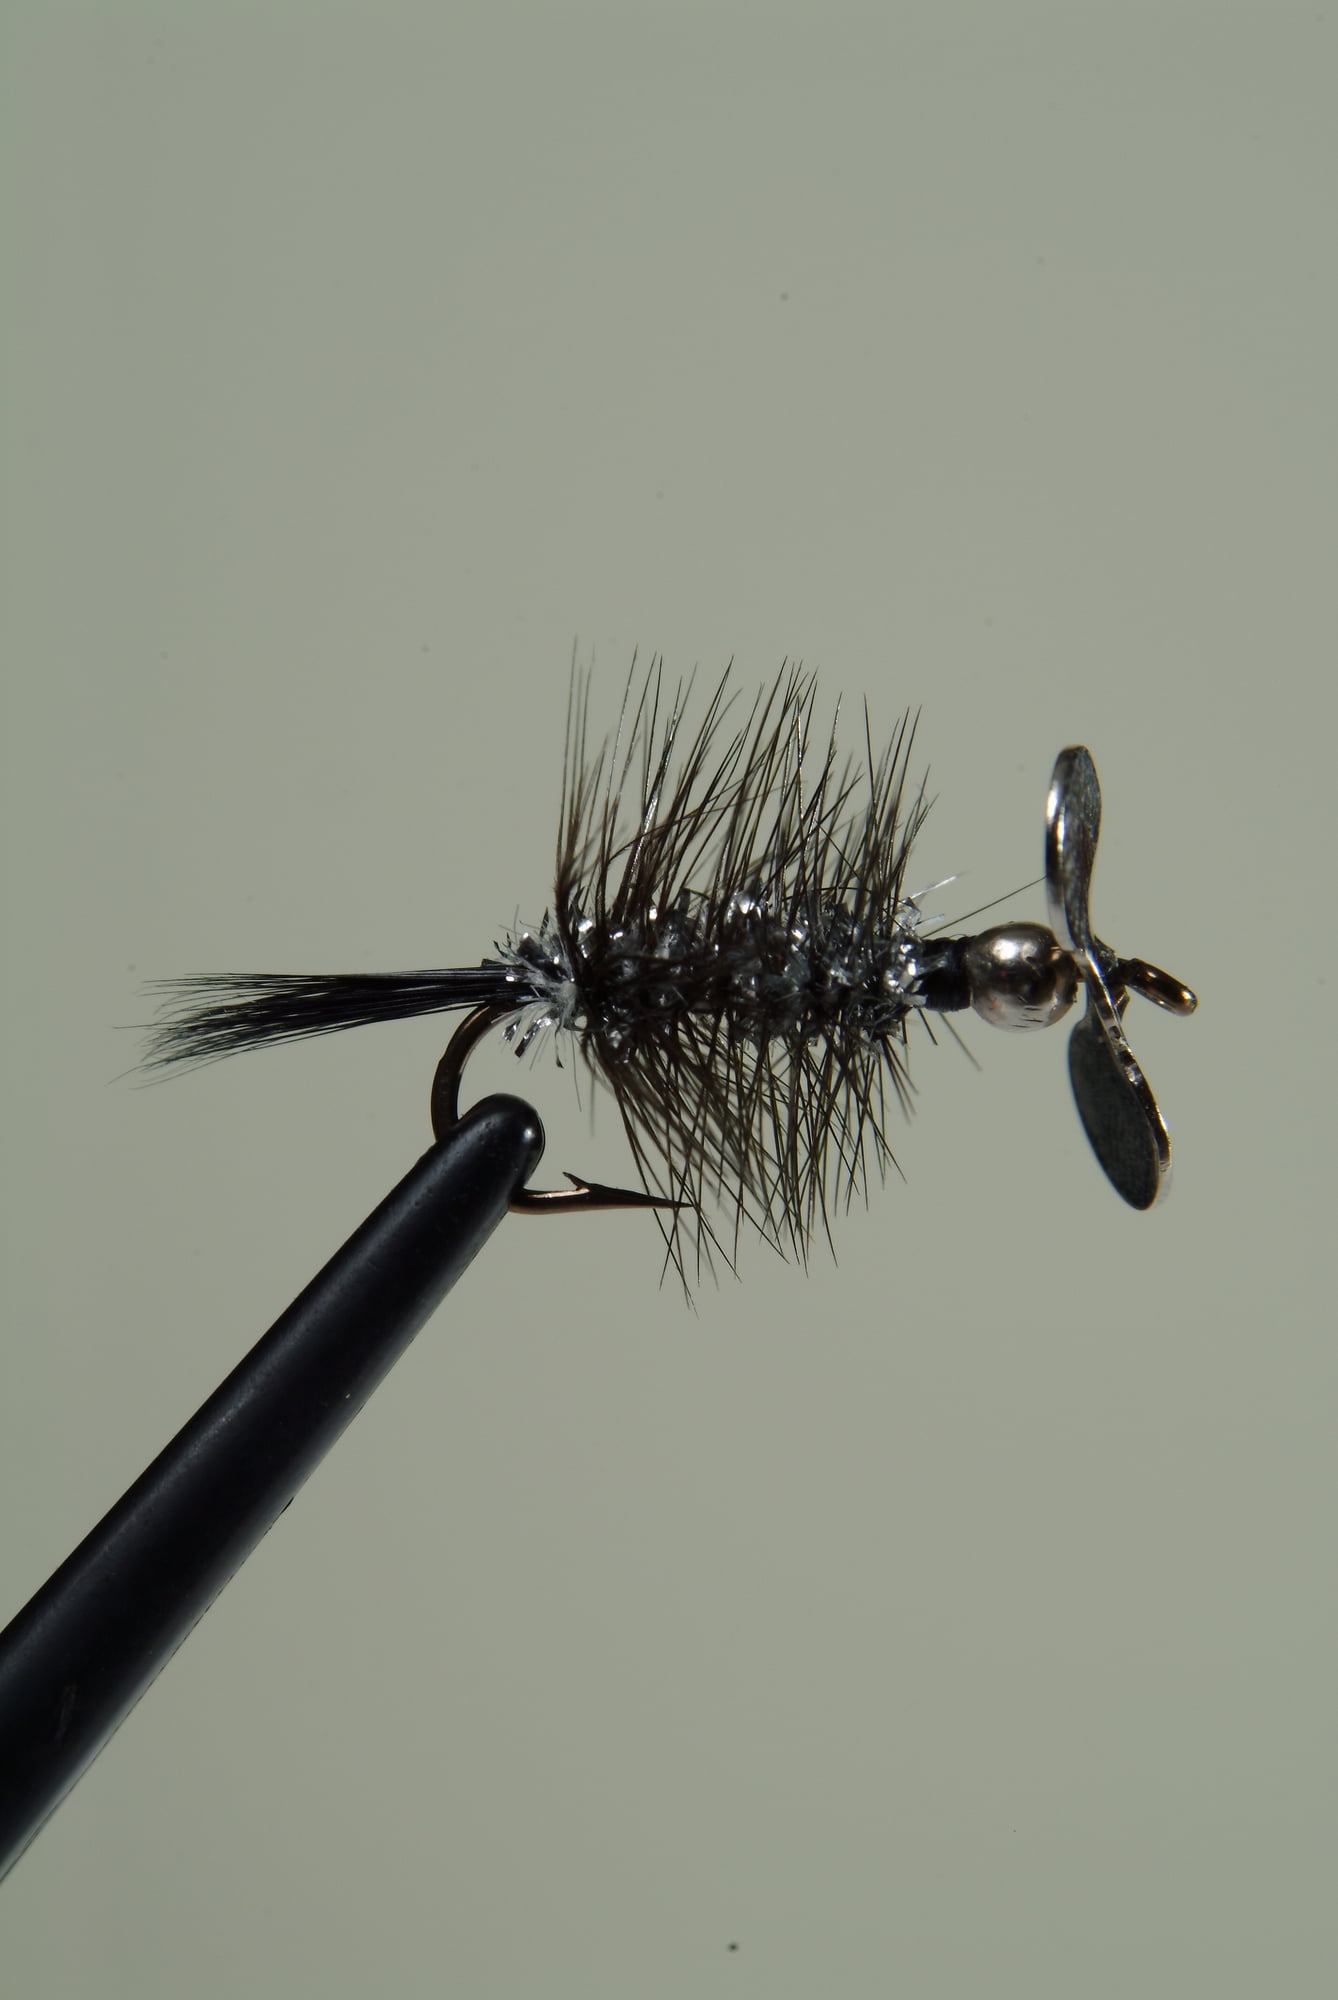 Pistol Pete's Freshwater Fly Fishing Lure for Trout & Panfish